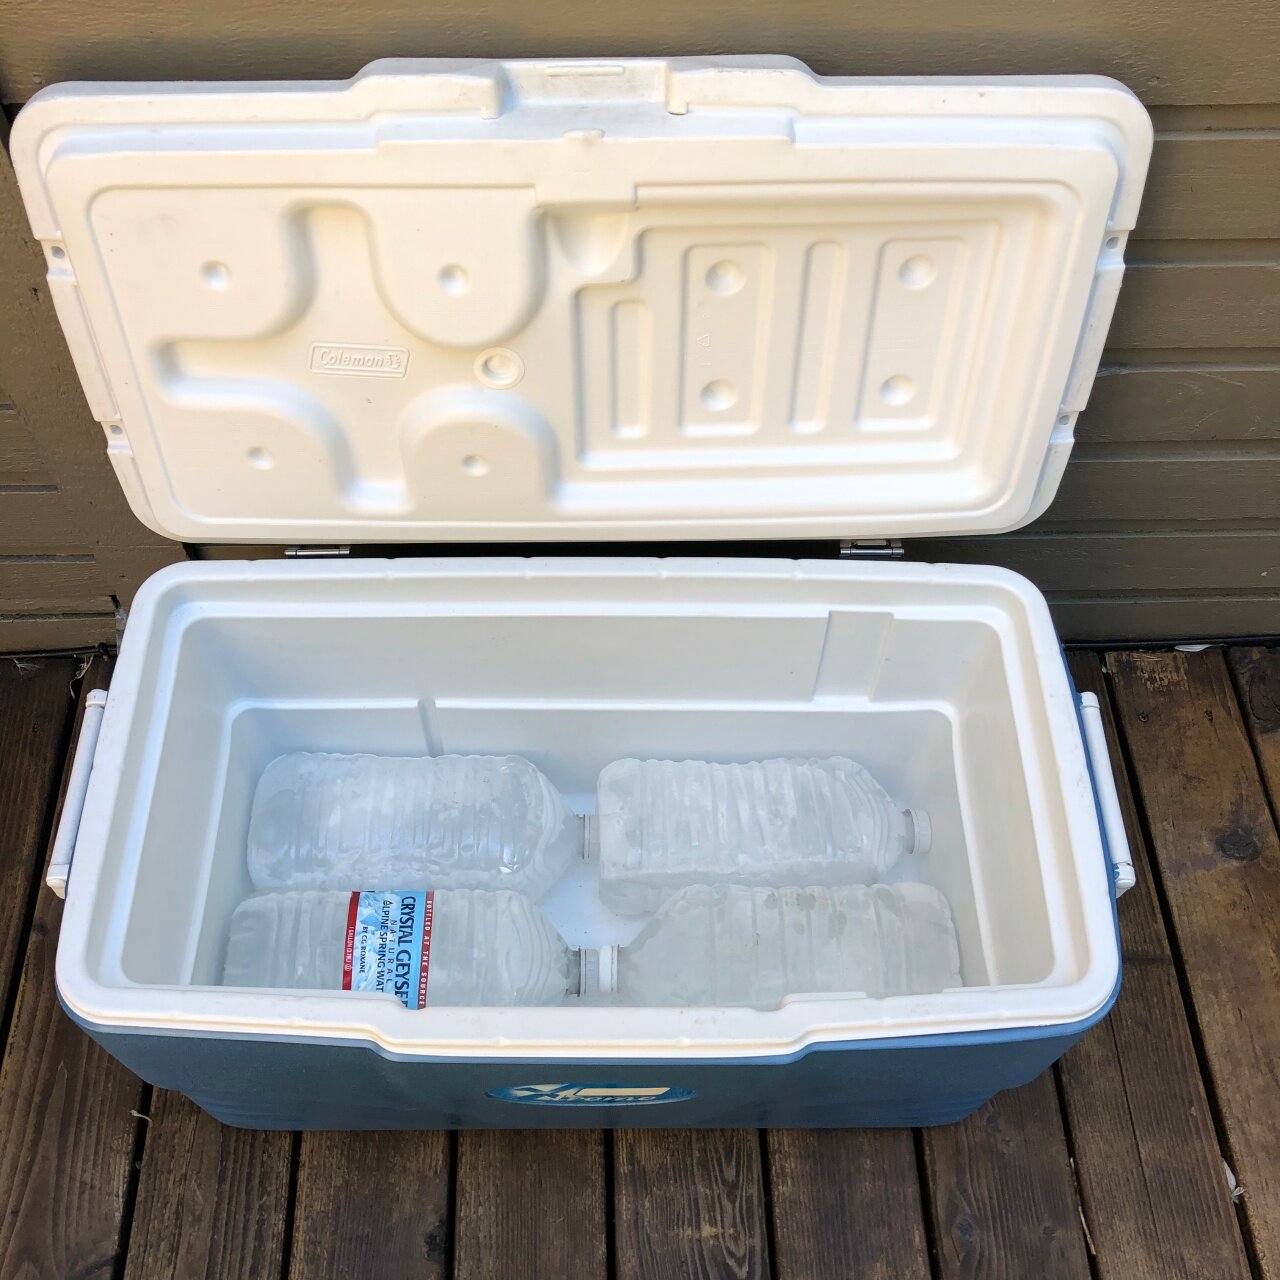 Should You Use Dry Ice in Your Cooler?